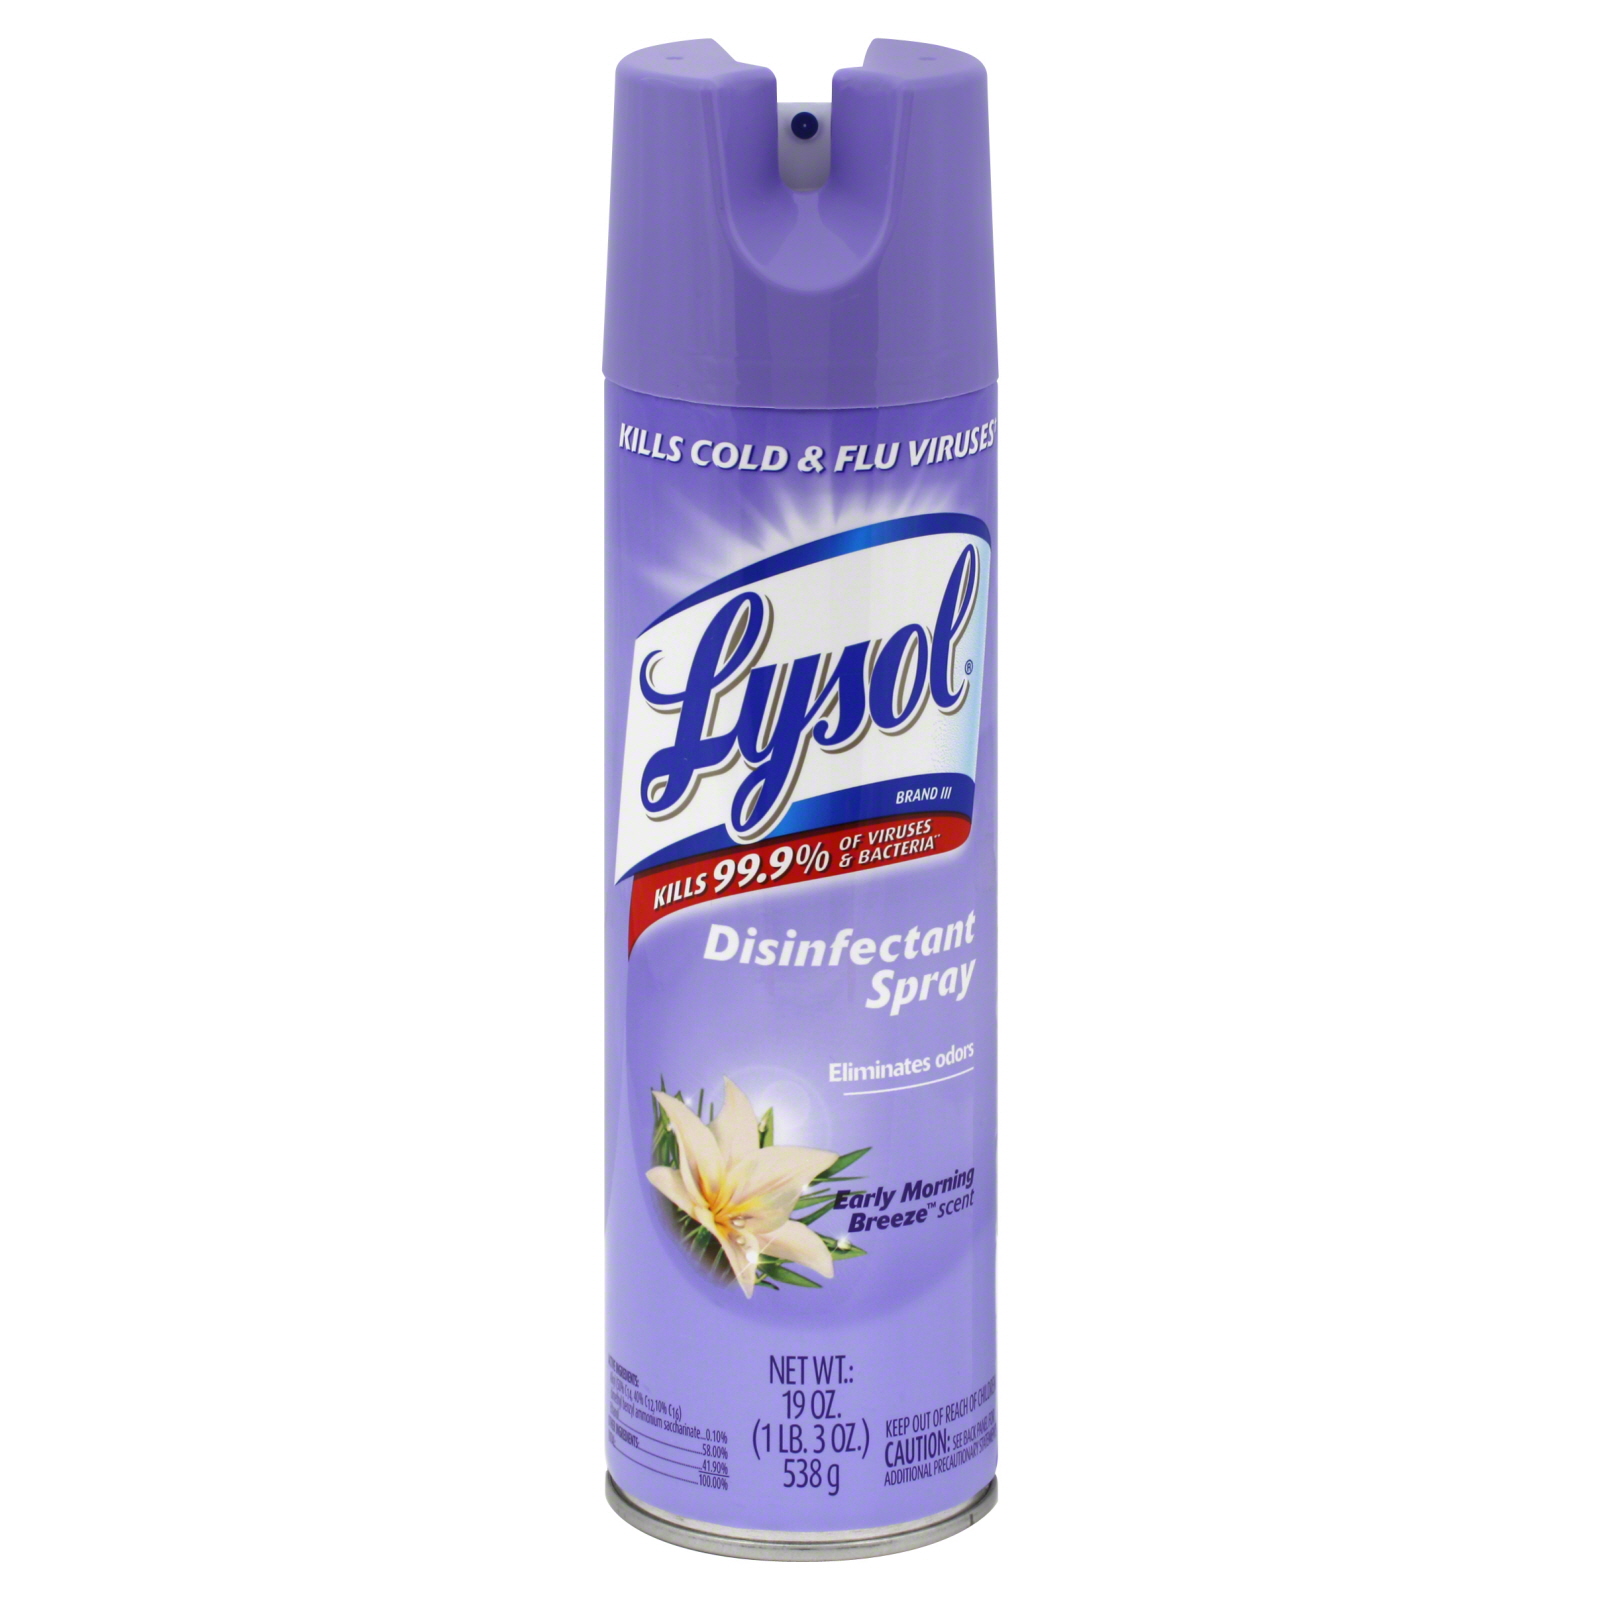 Lysol Disinfectant Spray, Early Morning Breeze Scent, 19 oz (1 lb 3 oz) 539 g